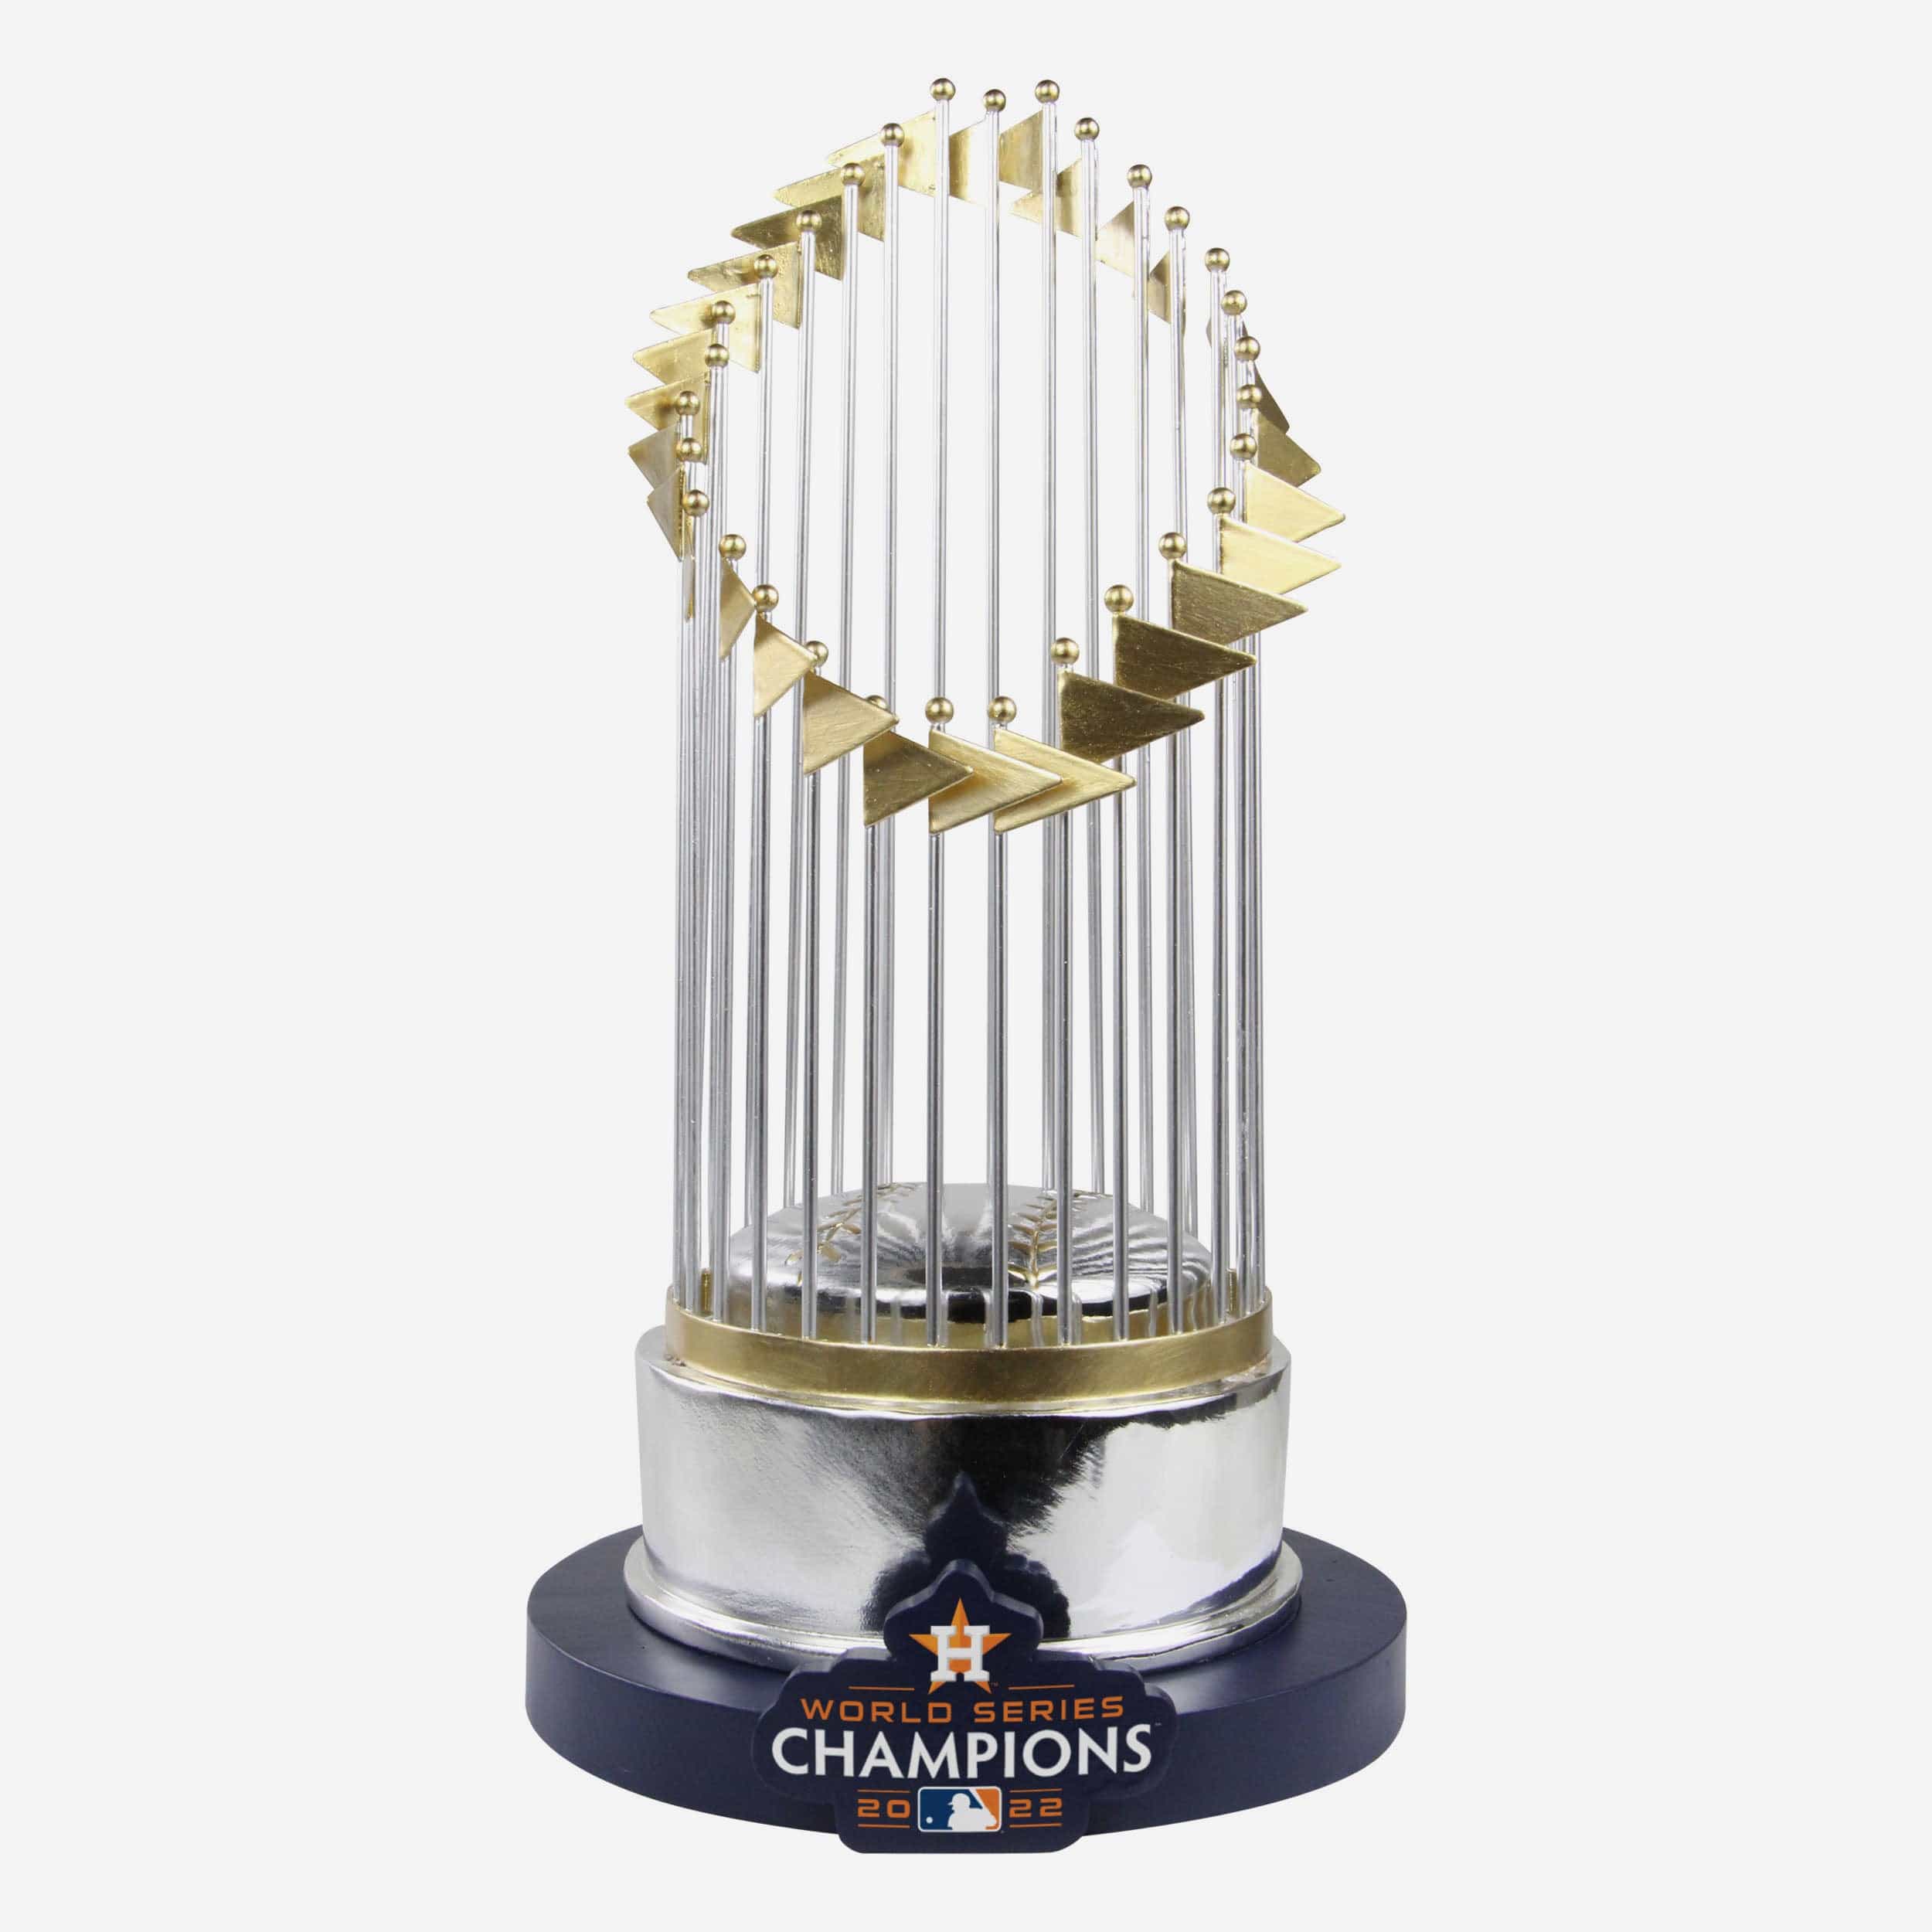 2022 World Series Champions: Houston Astros, Official Trailer